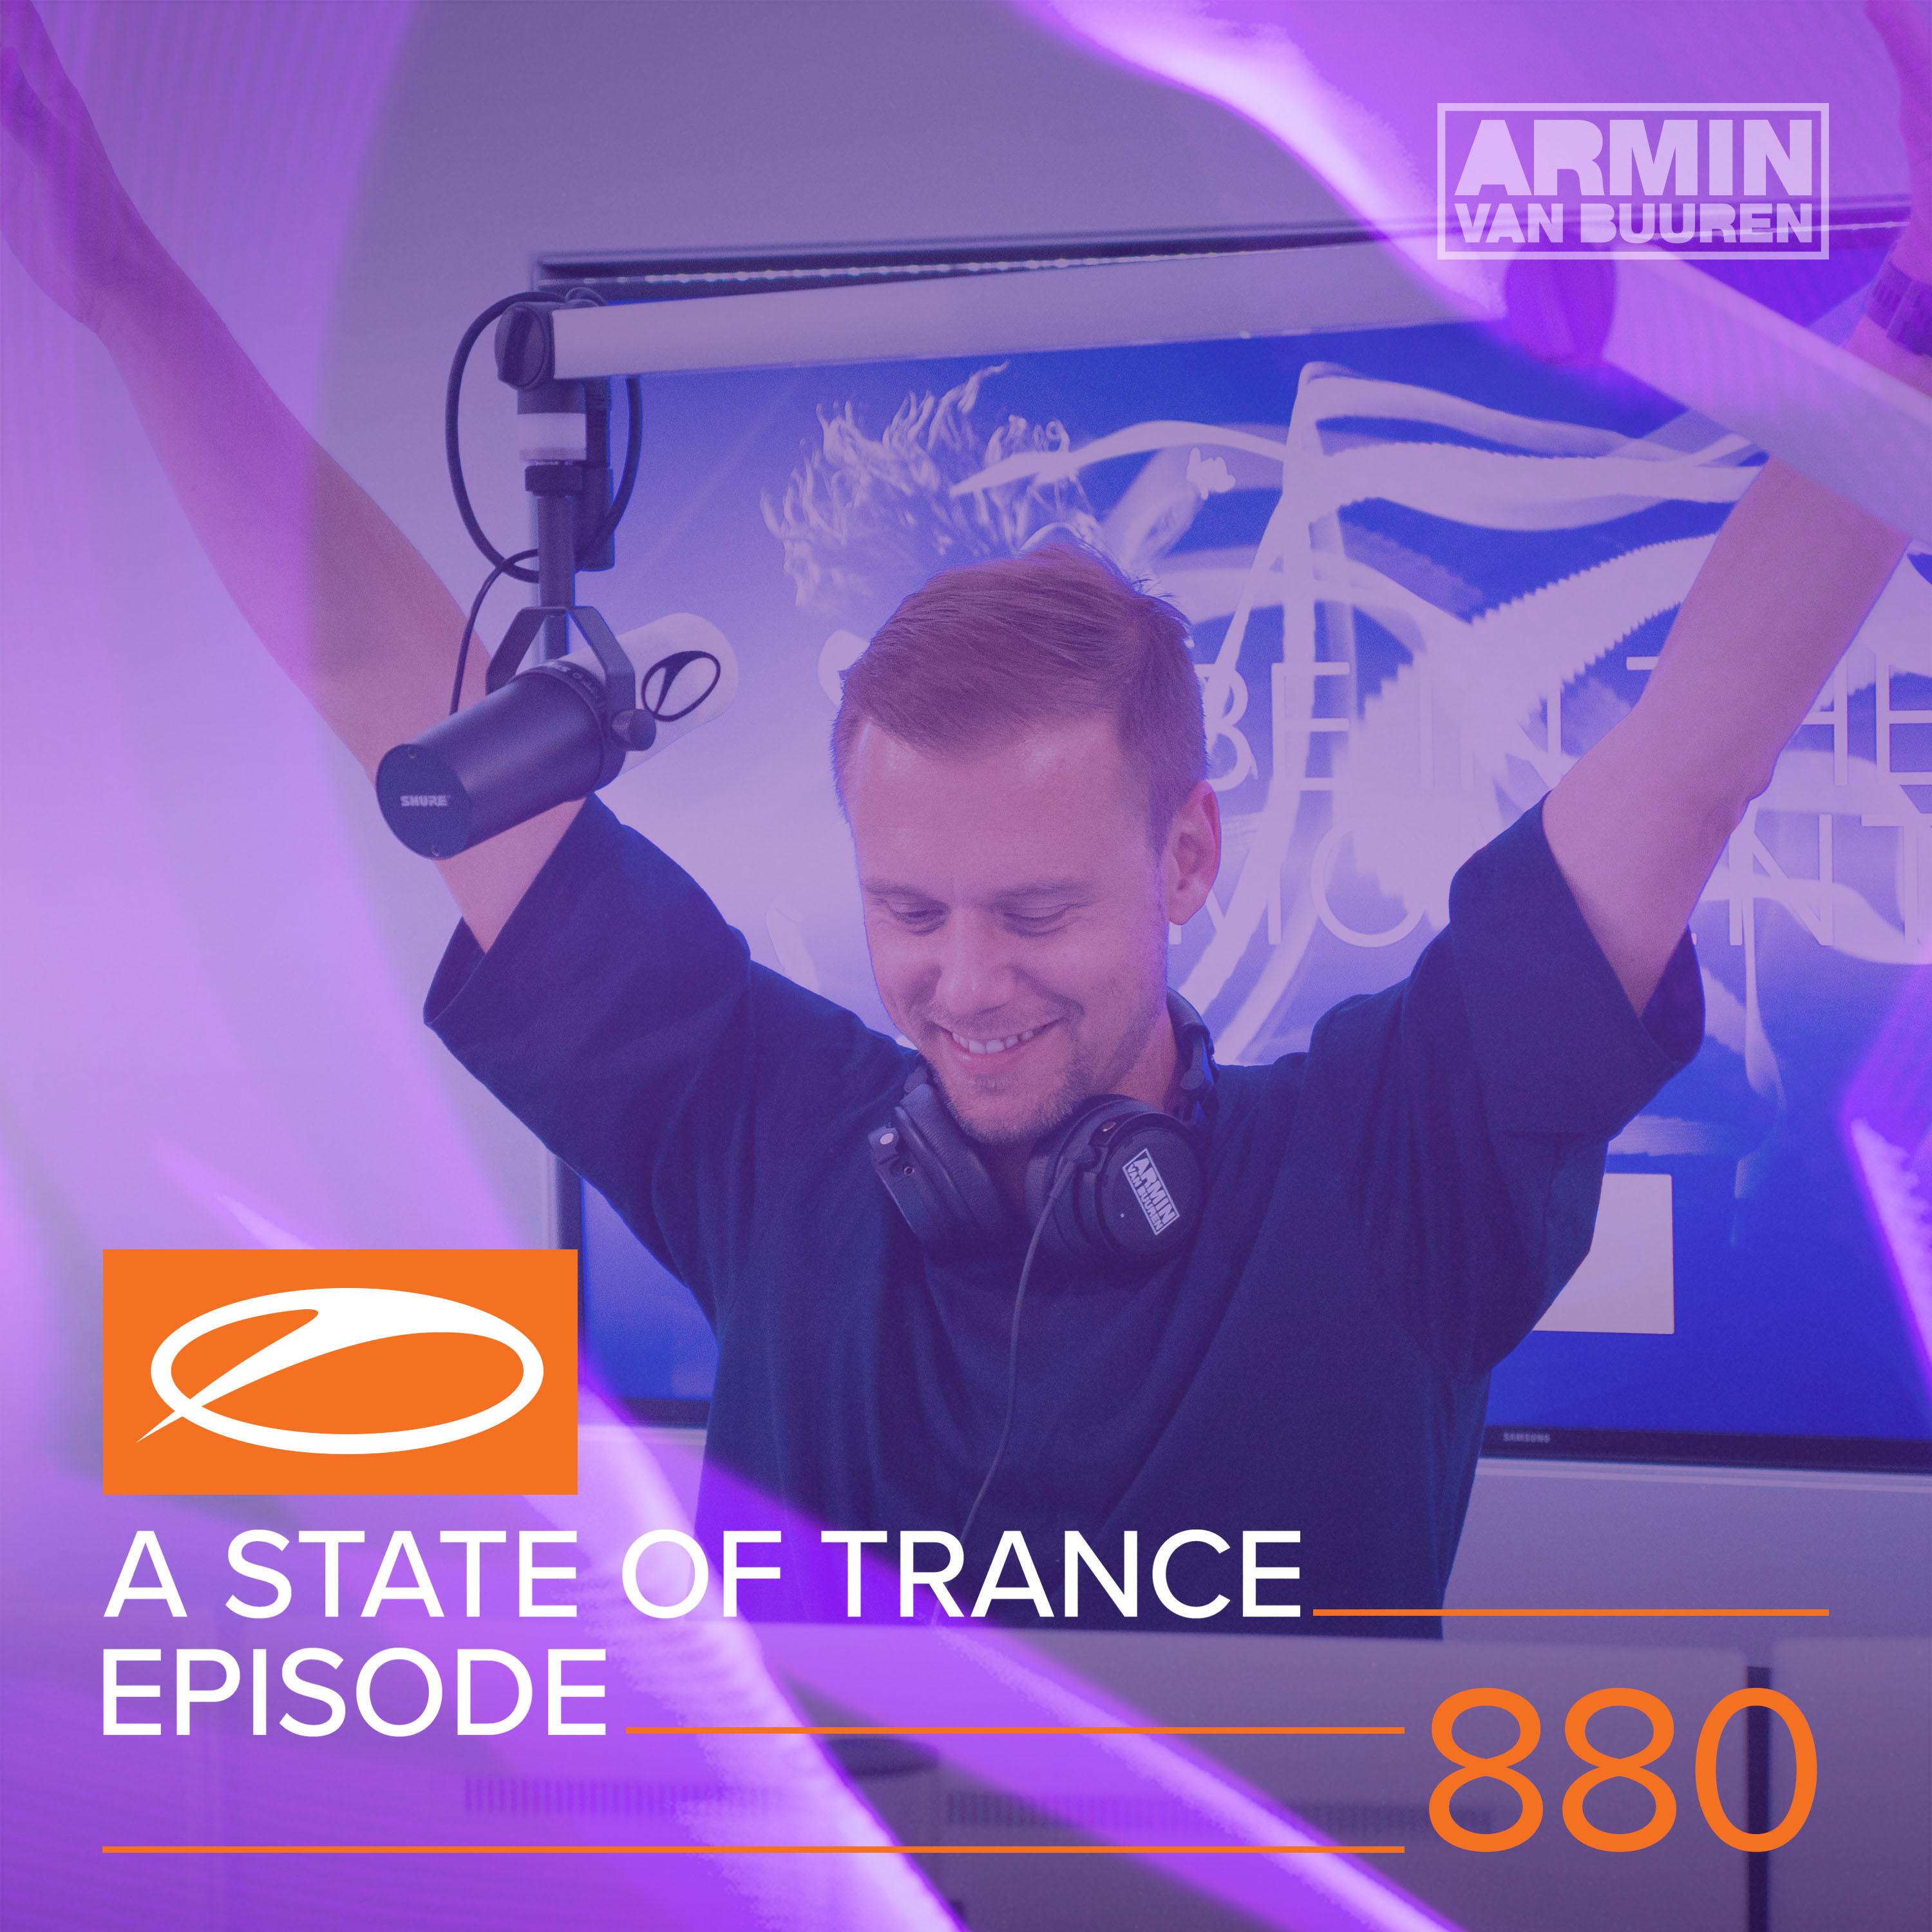 A State Of Trance (ASOT 880) (Track Recap, Pt. 1)